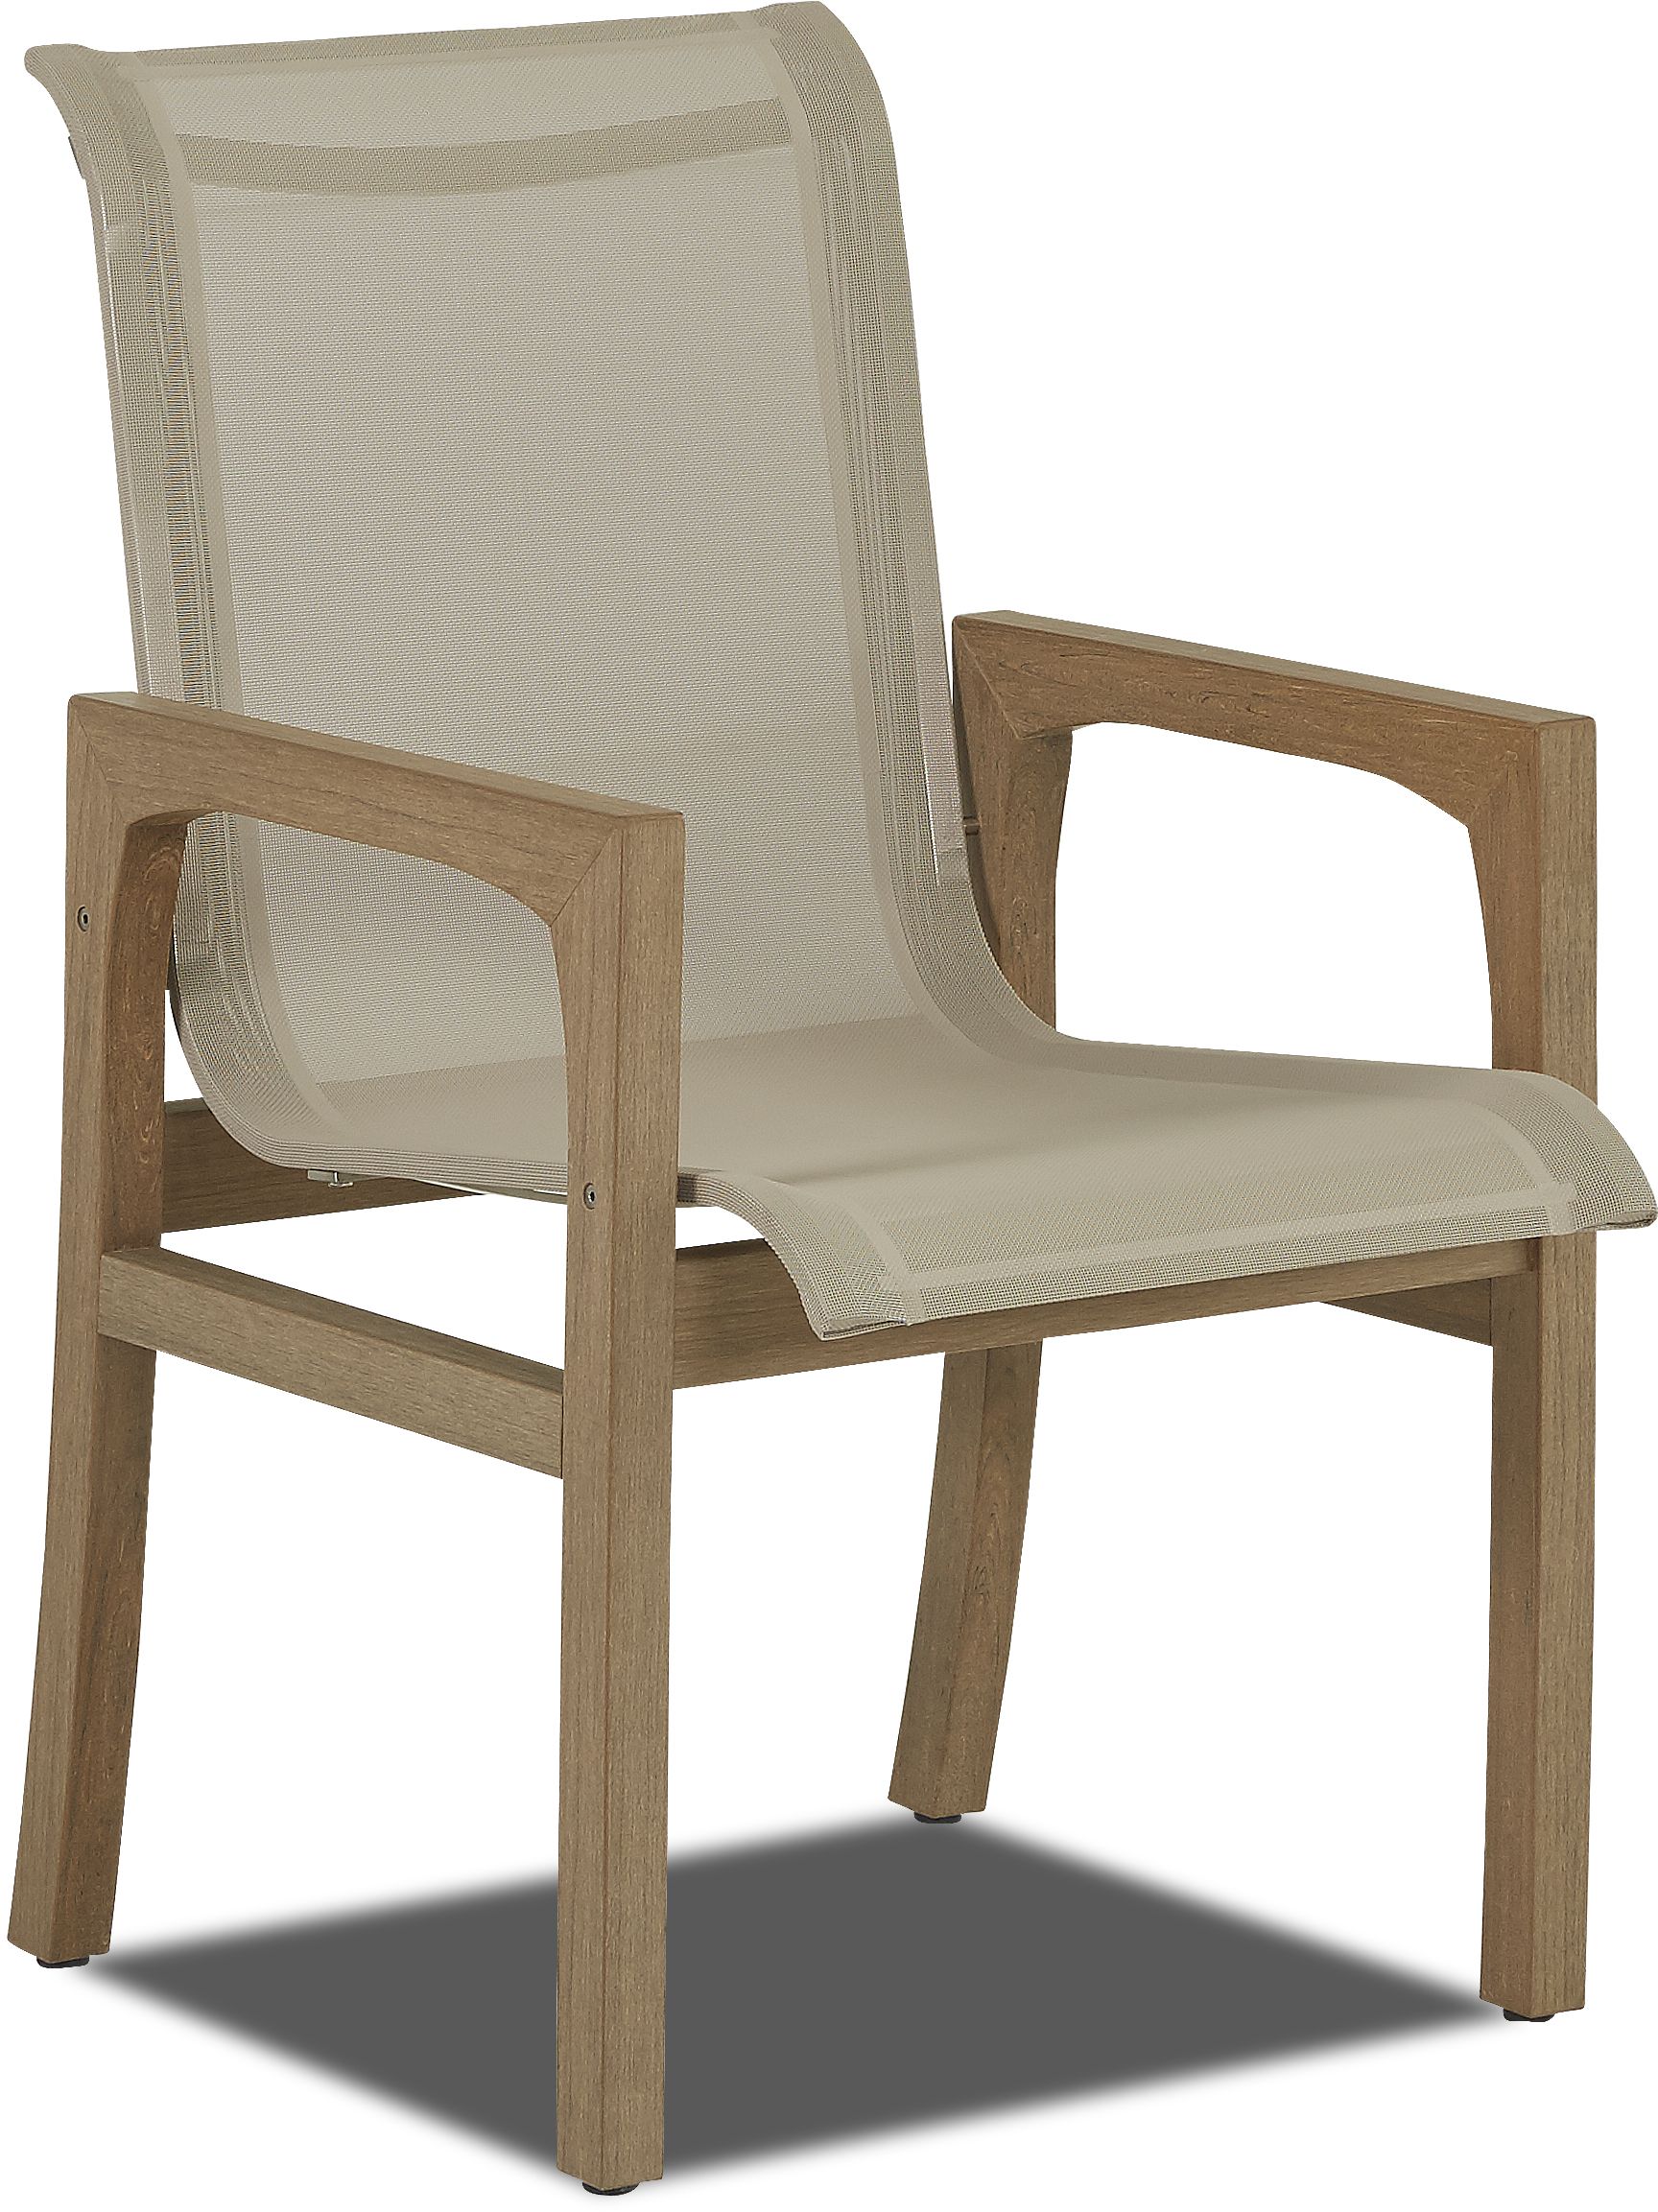 Klaussner® Outdoor Delray Dune Sling Dining Chair